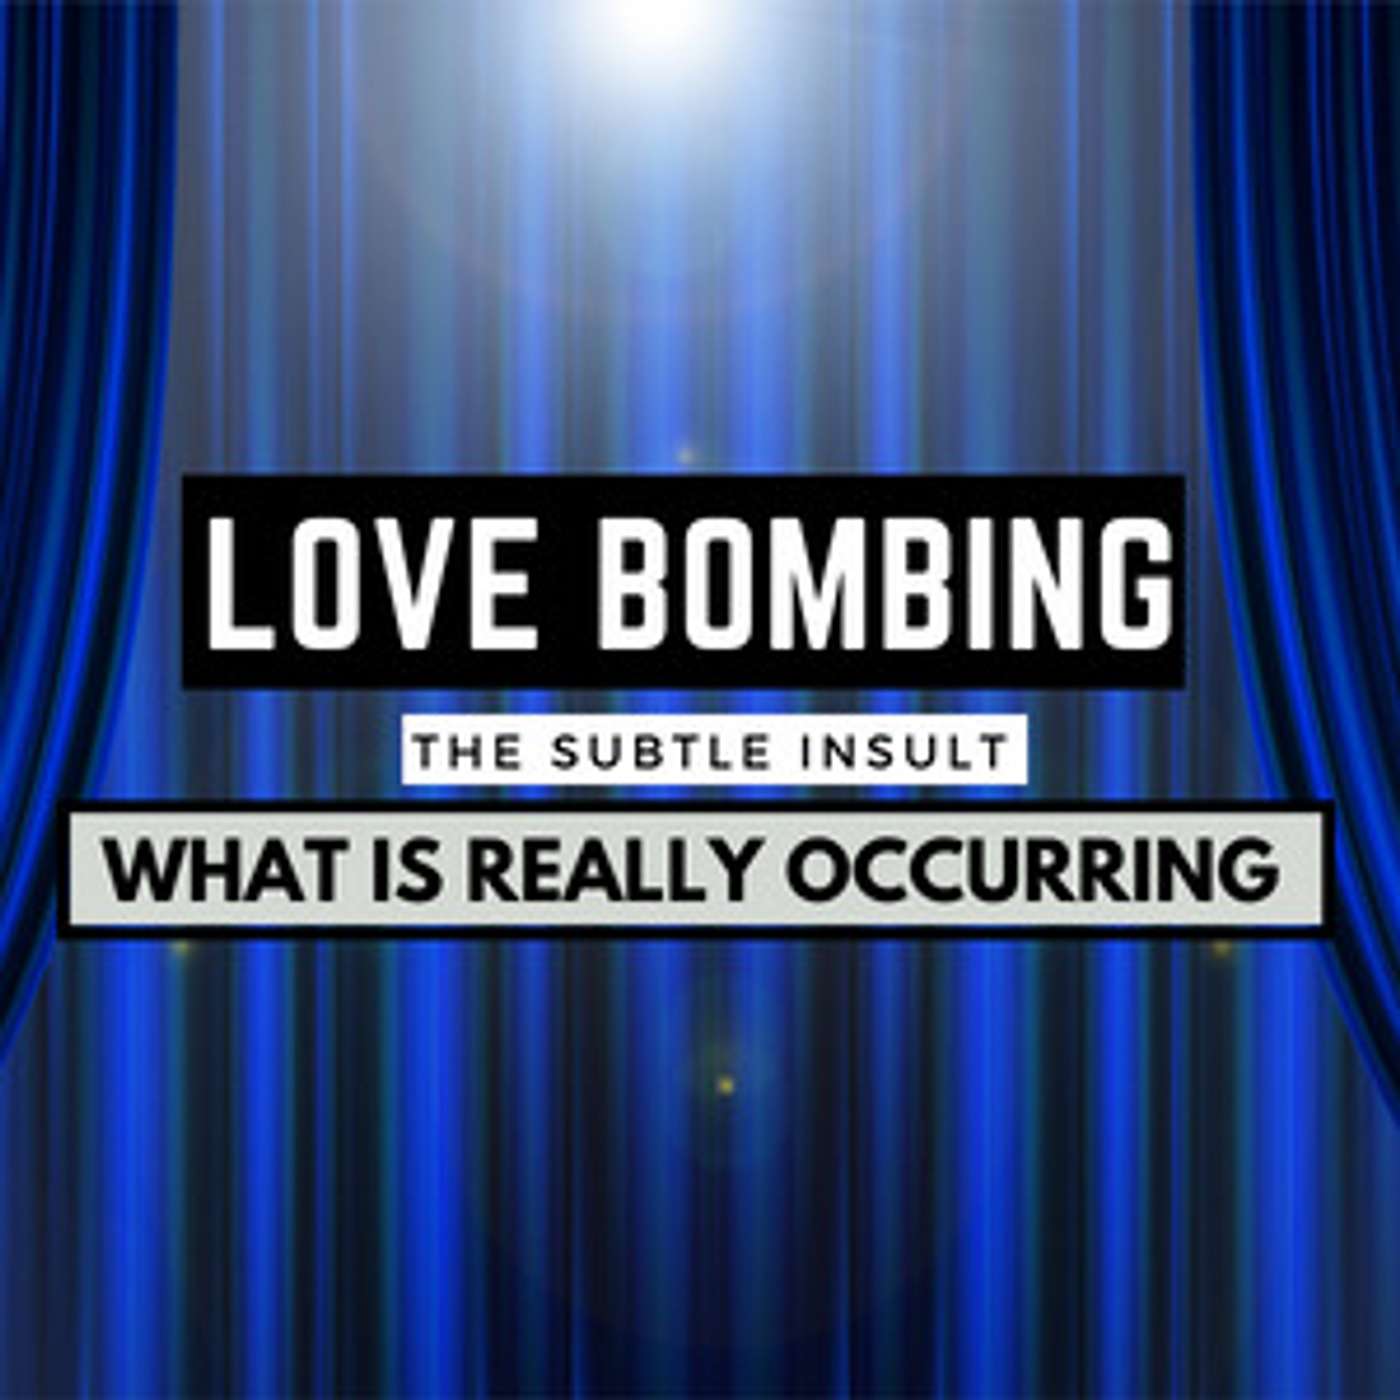 Love bombing: The Subtle Insult and What is Really Occurring